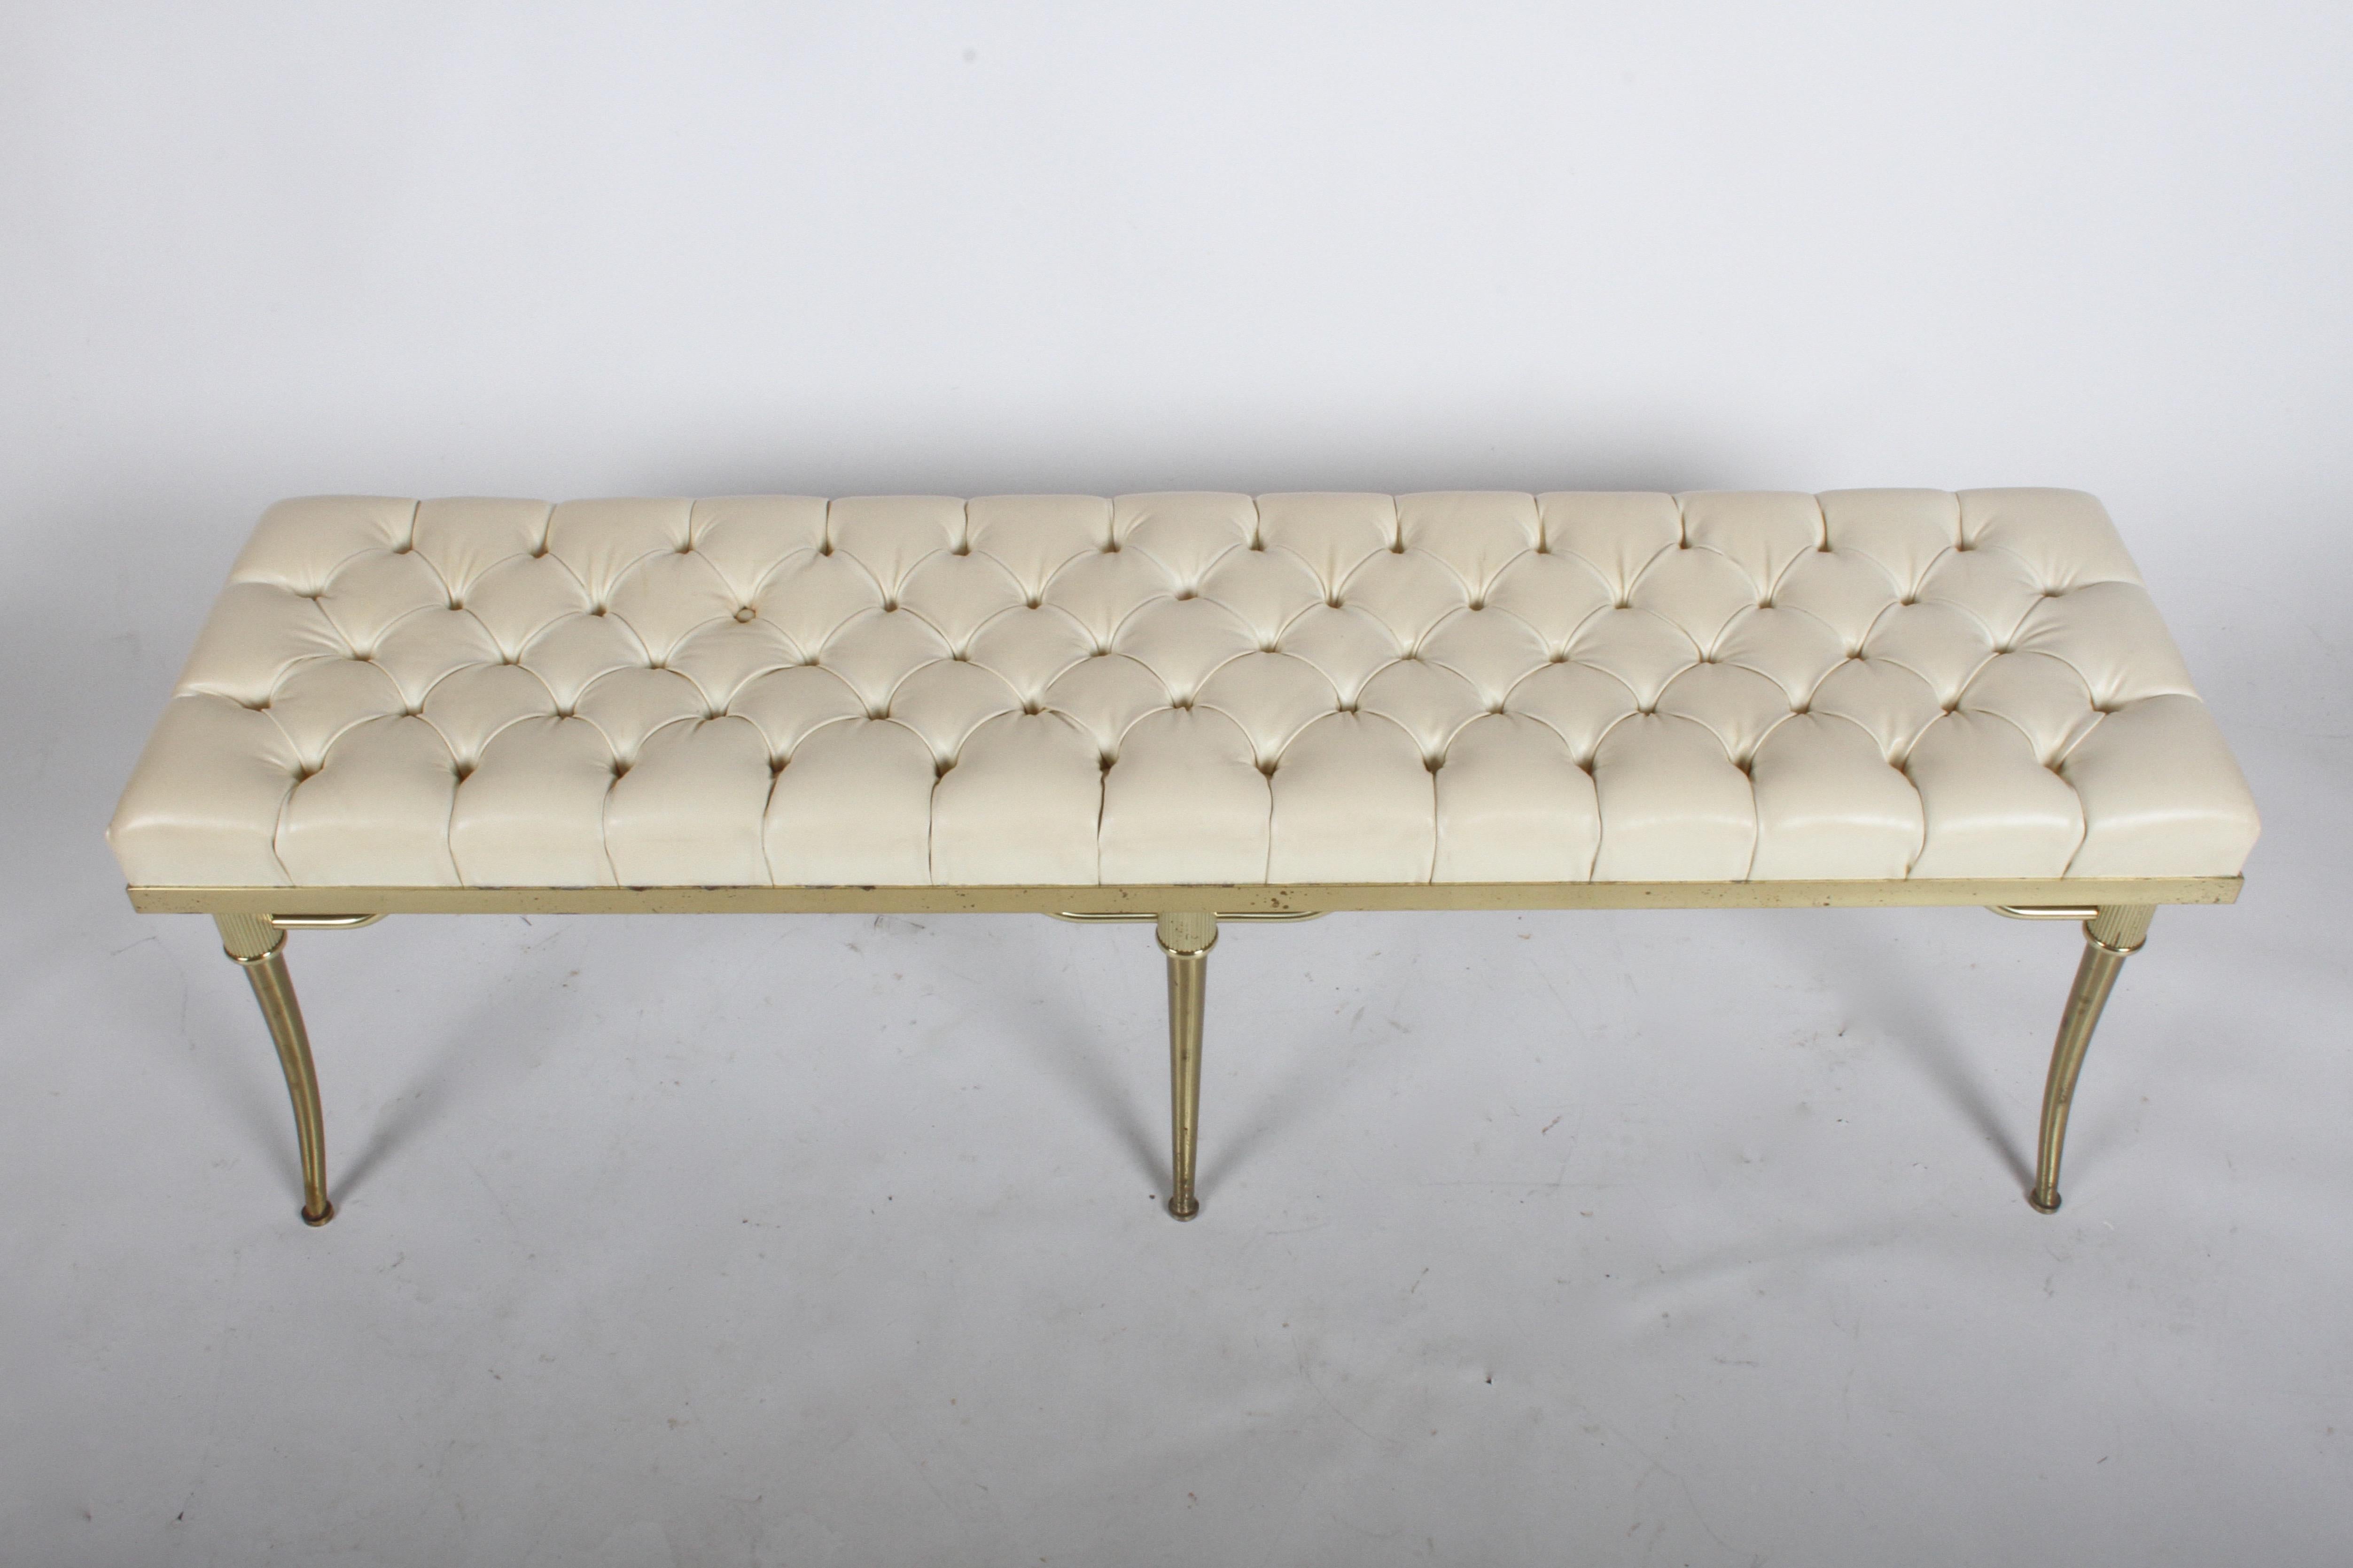 Stylish and rare midcentury bench by William Billy Haines with splayed klismos brass legs and original button tufted seat. Original upholstery should be replaced, brass show patina. Can be polished for additional cost. 

Measures: 60